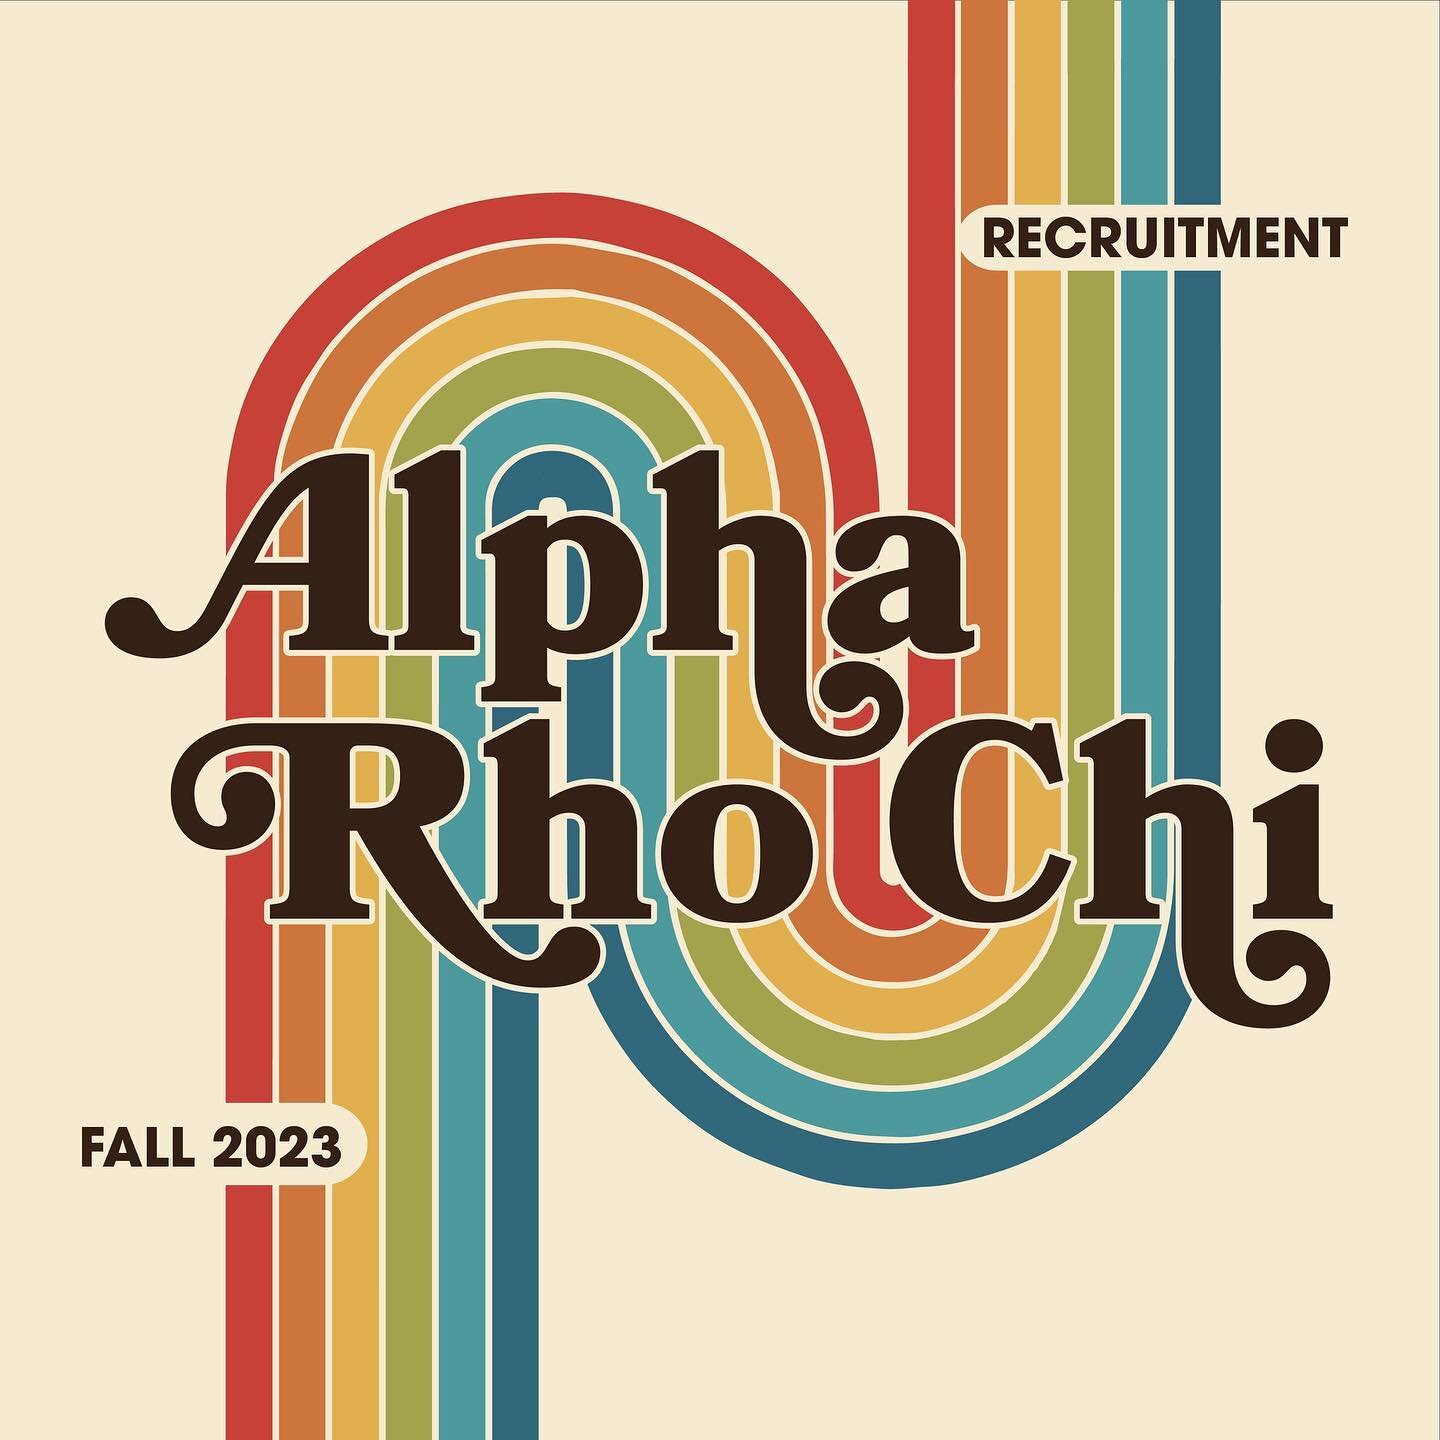 Recruitment Week is gonna be a blast! Can&rsquo;t wait to see you all there!